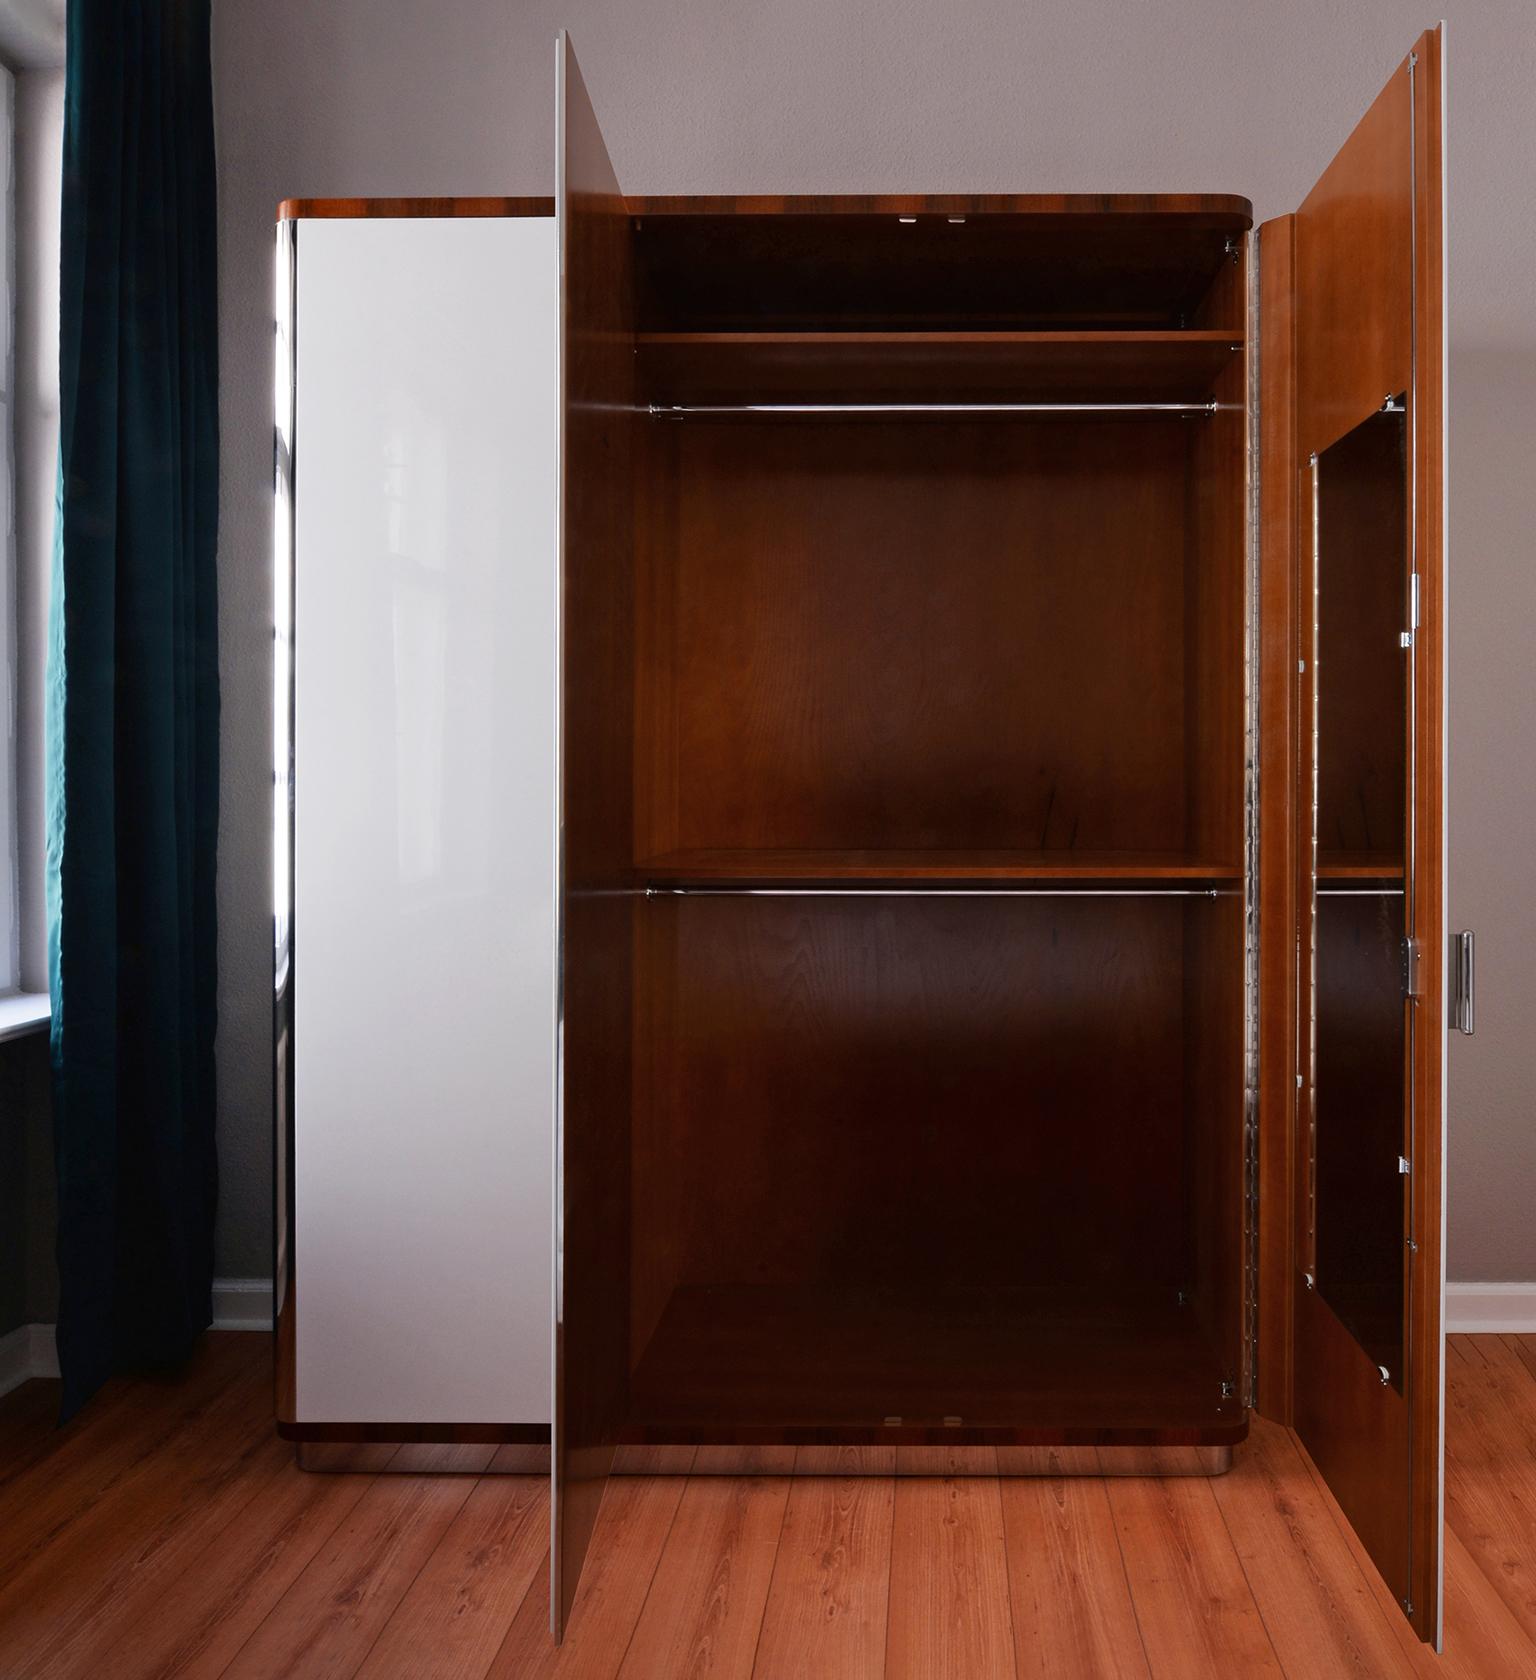 German Bespoke Modernist Three-Door Wardrobe in High-Gloss Lacquered Wood, Hand Crafted For Sale